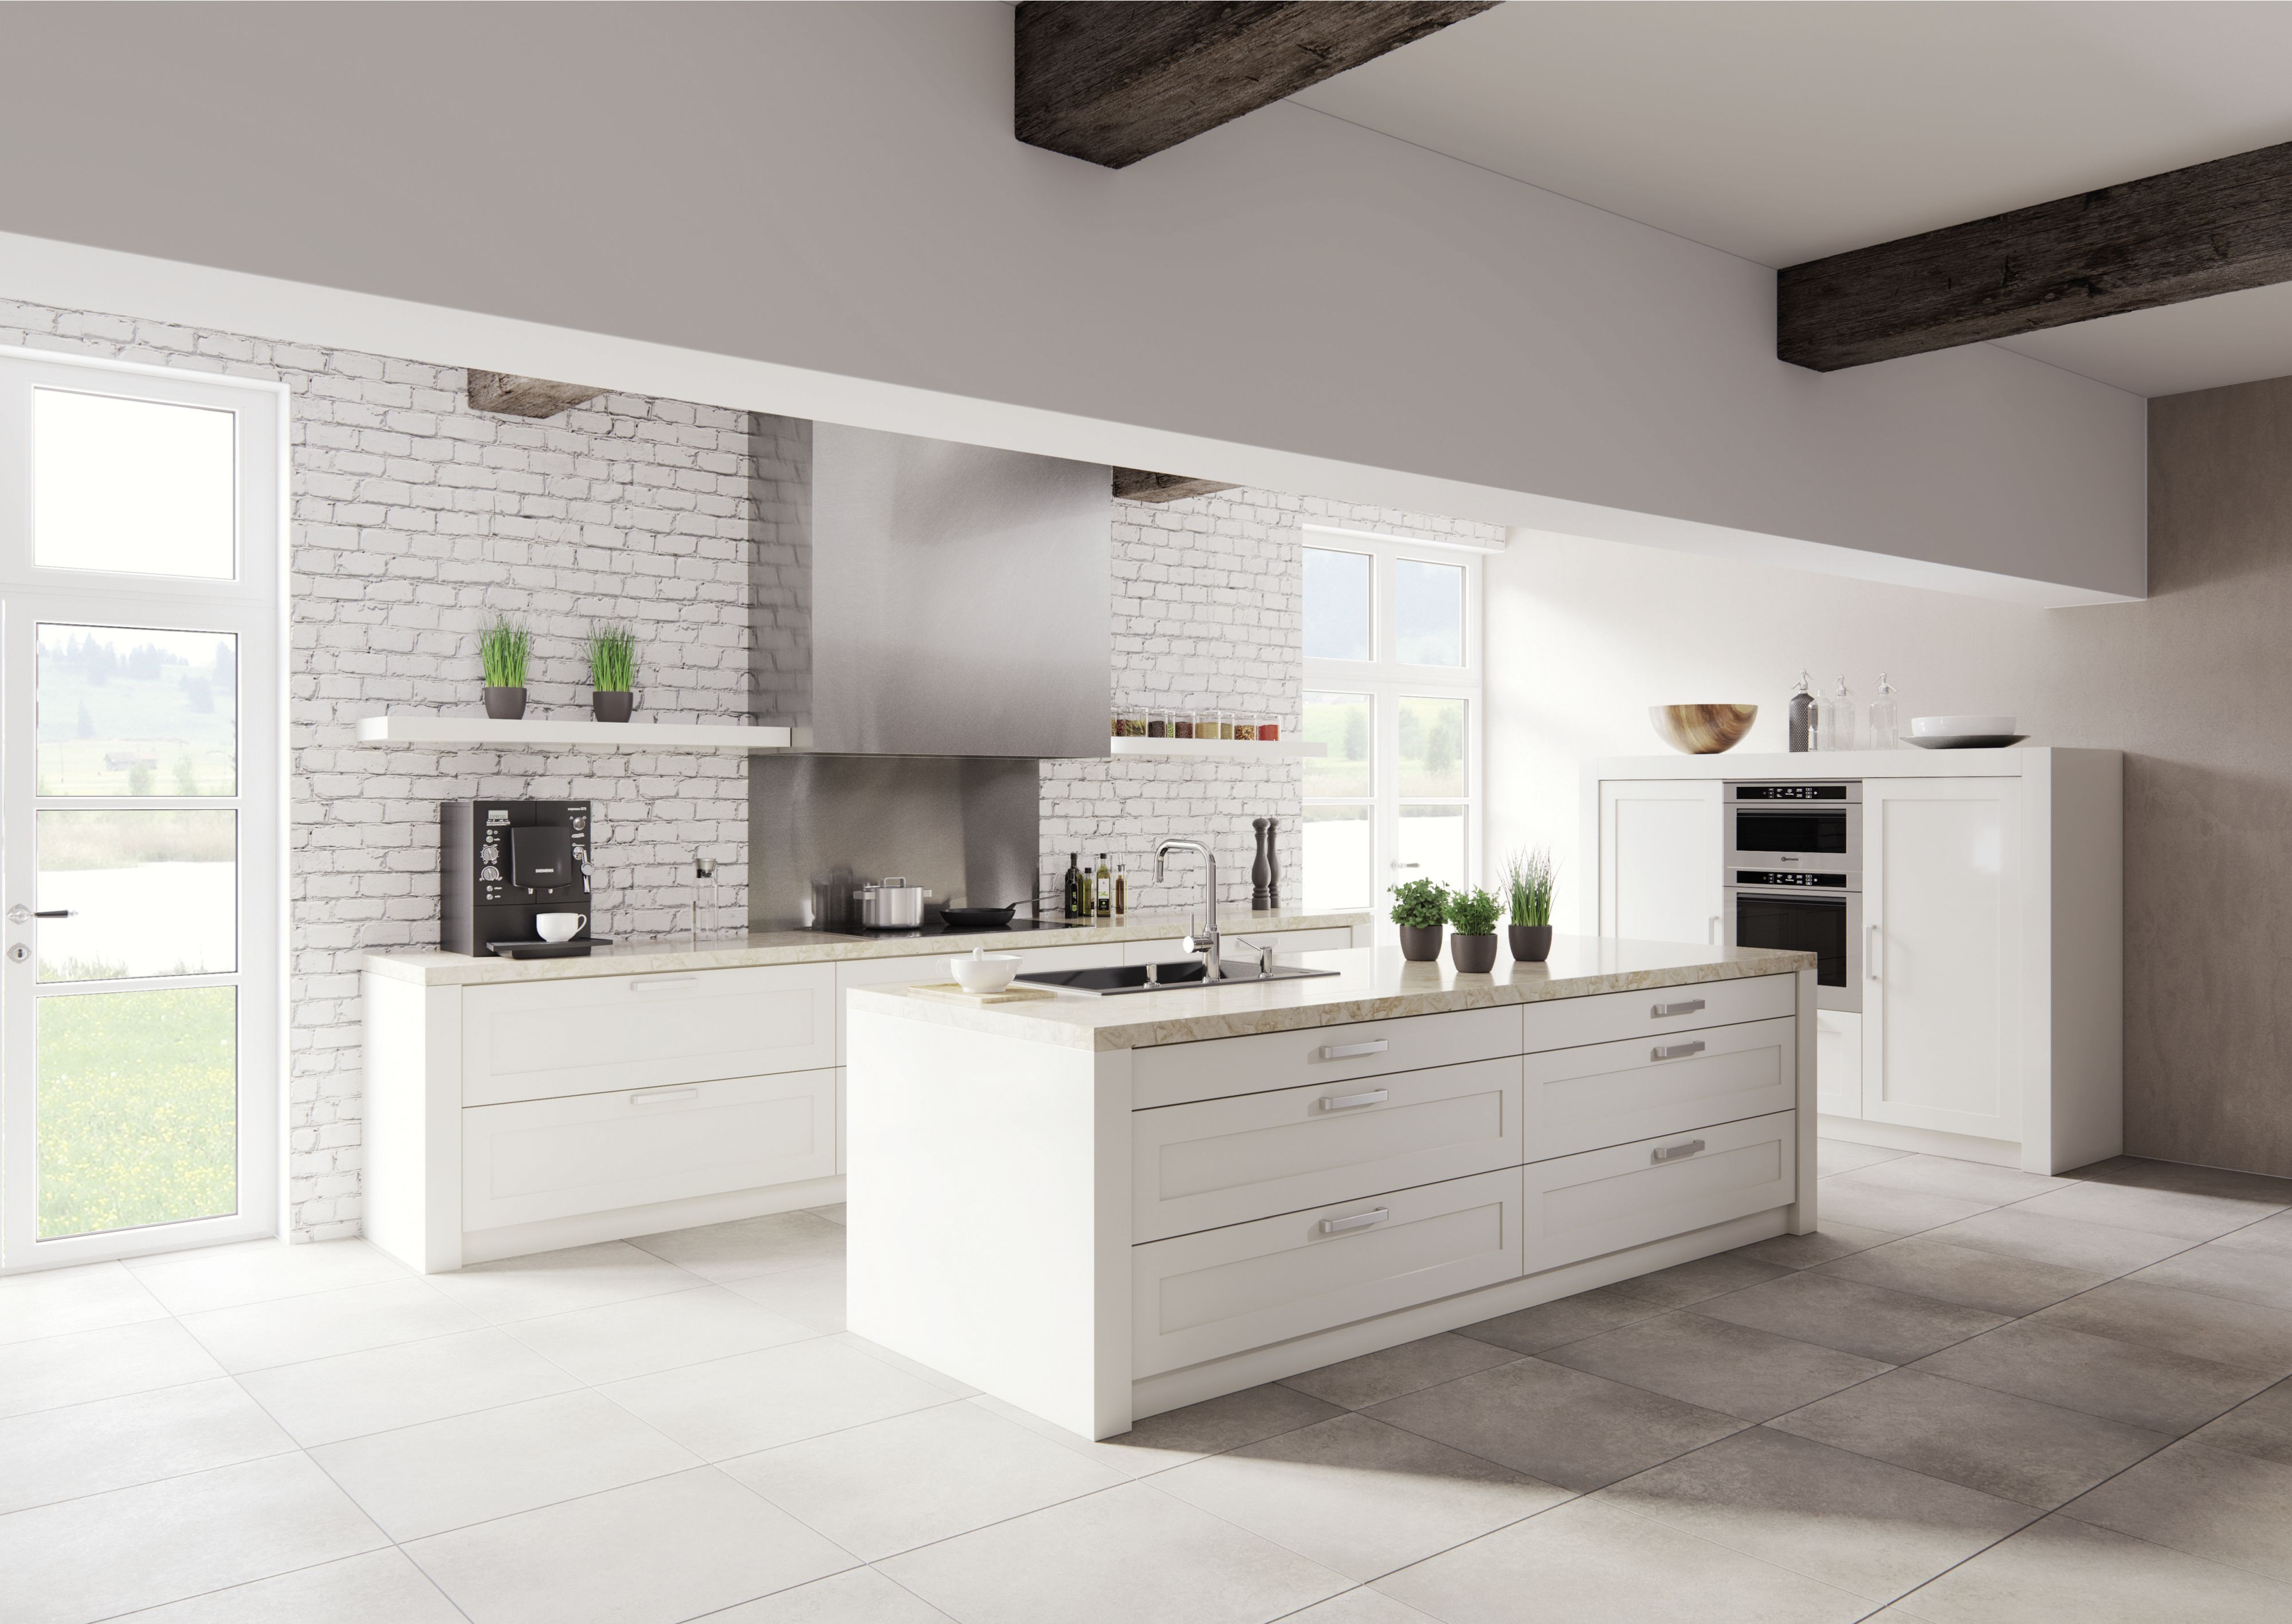 The I-kitchen is impressive for its clean line and uncluttered design.